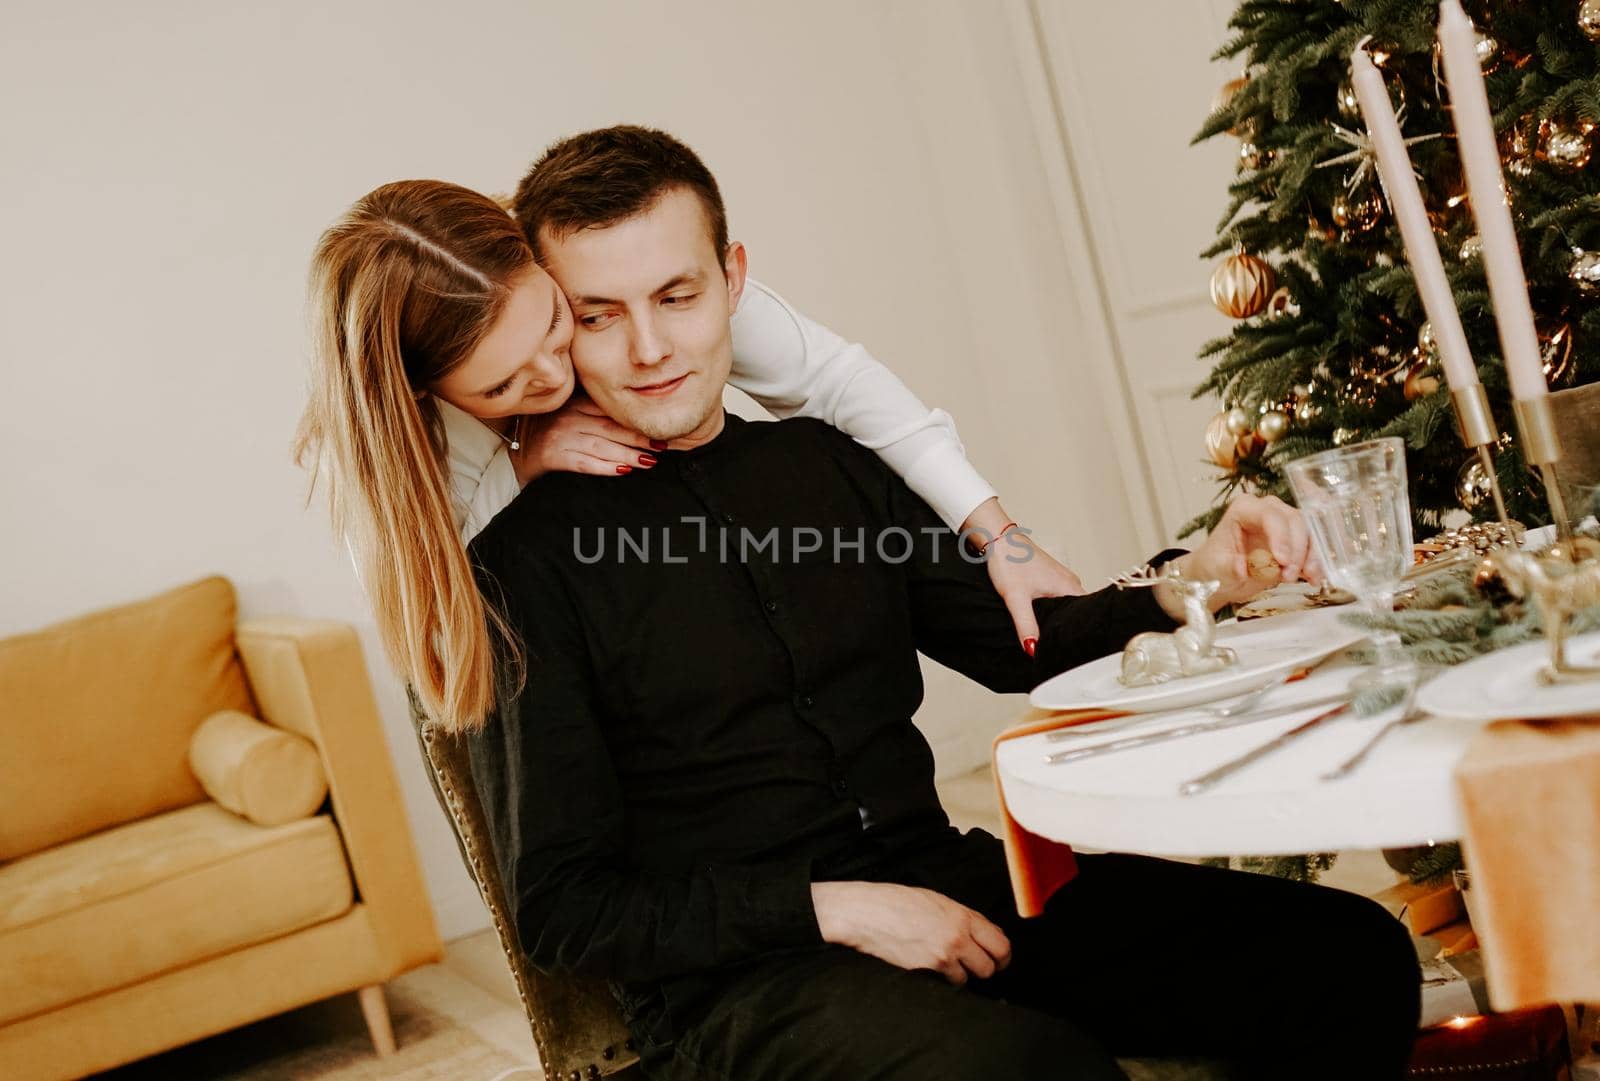 Young happy couple in love hugging.Young man and woman celebrate Christmas holidays together in a bright room with table decorated for xmas